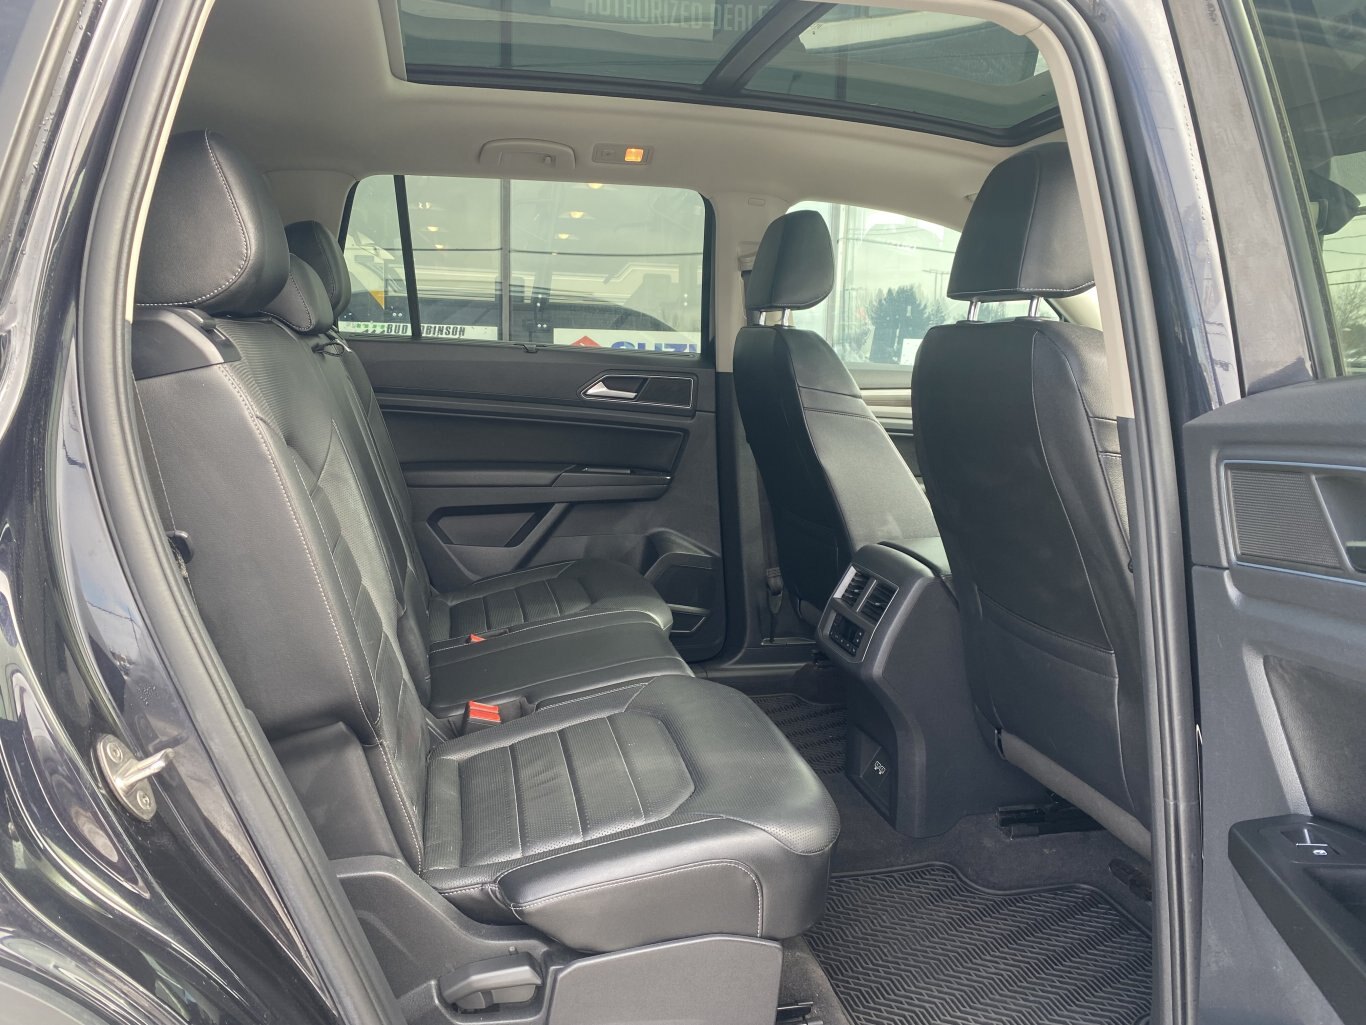 2019 VOLKSWAGEN ATLAS HIGHLINE R LINE PACKAGE AWD 3RD ROW SEATING WITH SUNROOF, LEATHER SEATS, HEATED SEATS, HEATED STEERING WHEEL, REMOTE START, POWER TRUNK, REAR VIEW CAMERA & NAVIGATION!!